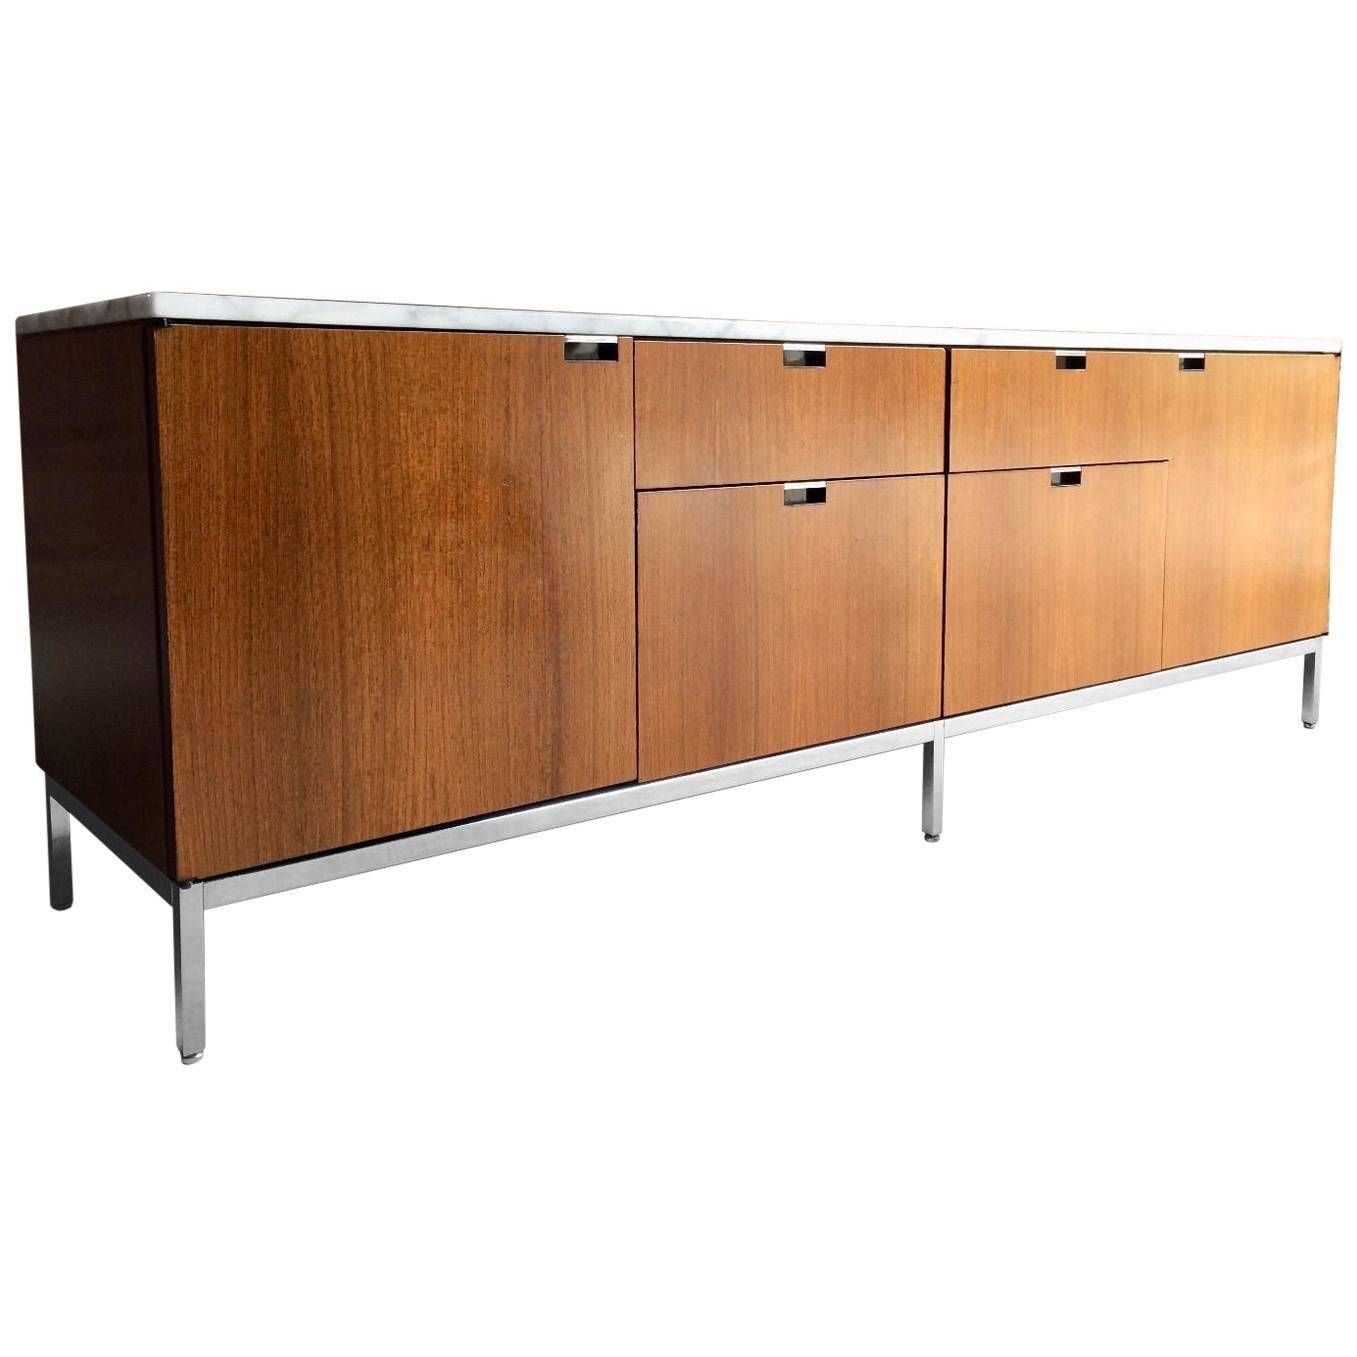 Florence Knoll Credenza Sideboard Marble Topped Light Walnut Mid Intended For Best And Newest Florence Knoll Sideboards (View 9 of 15)